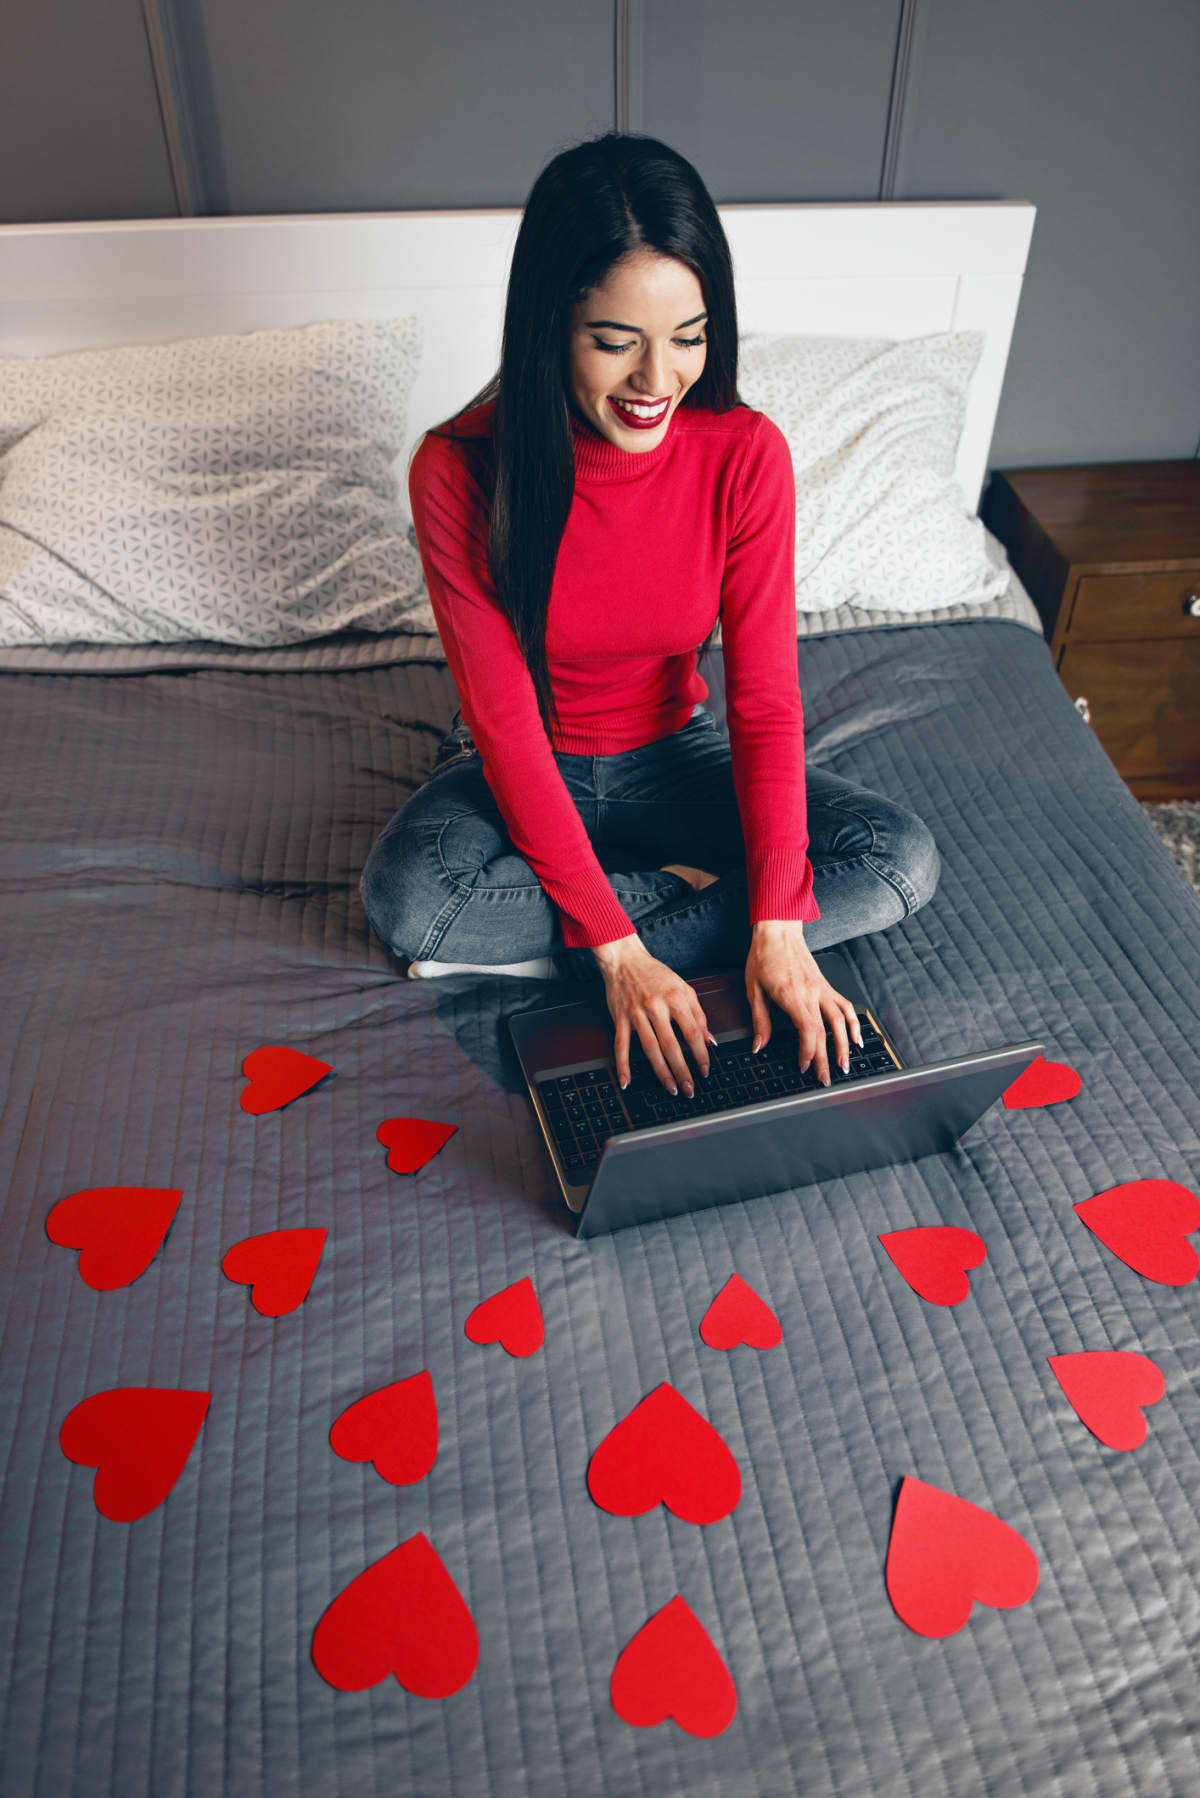 Beautiful young woman surrounded with red hearts, using a laptop